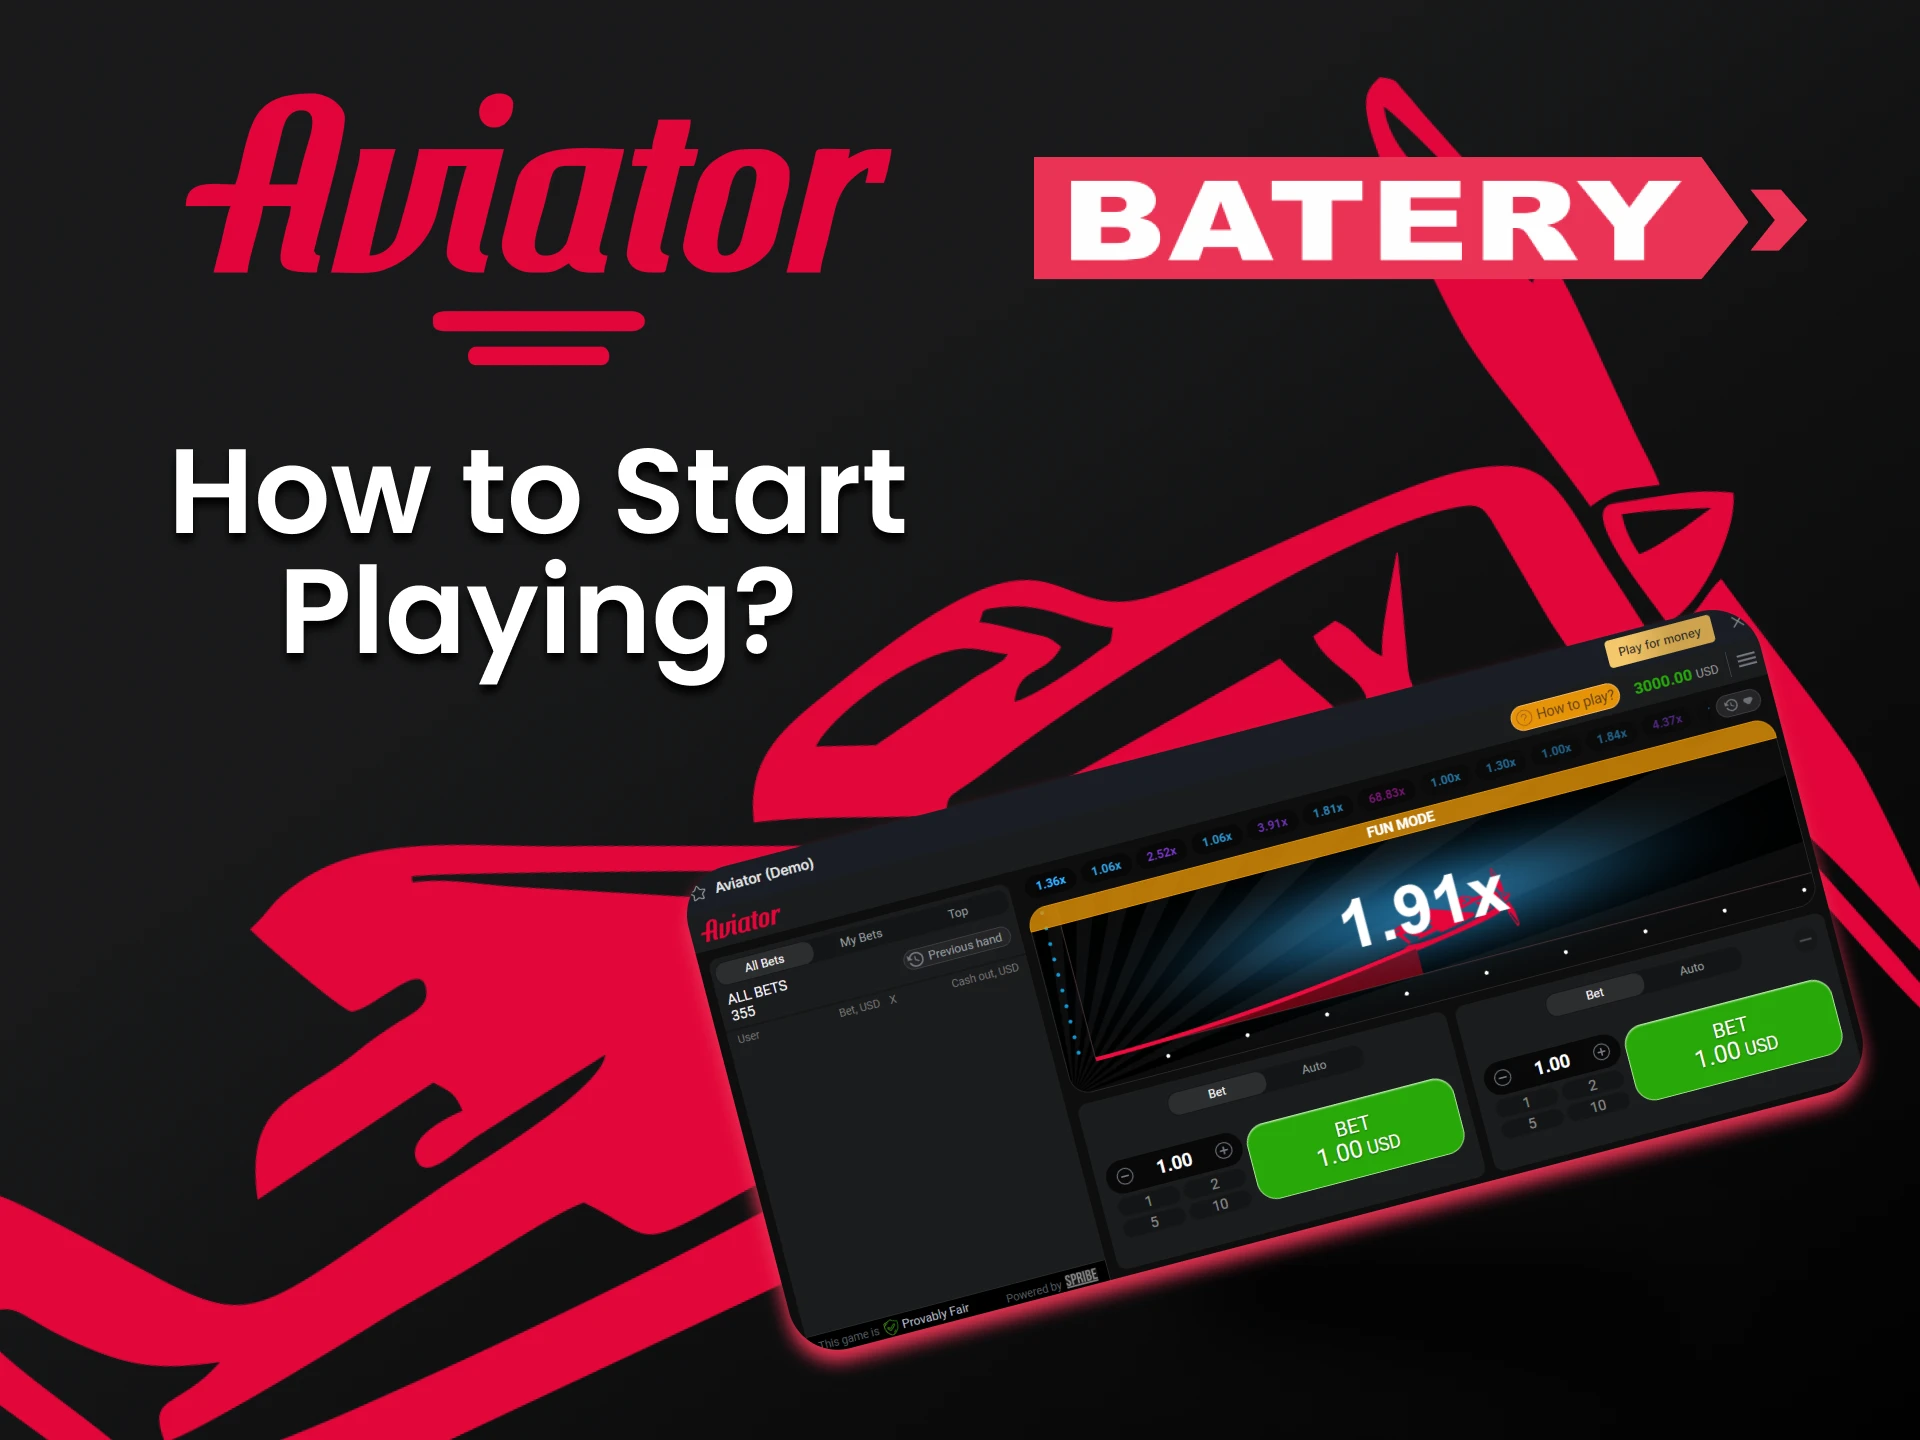 Find out what you need to do to start playing Aviator on Batery.